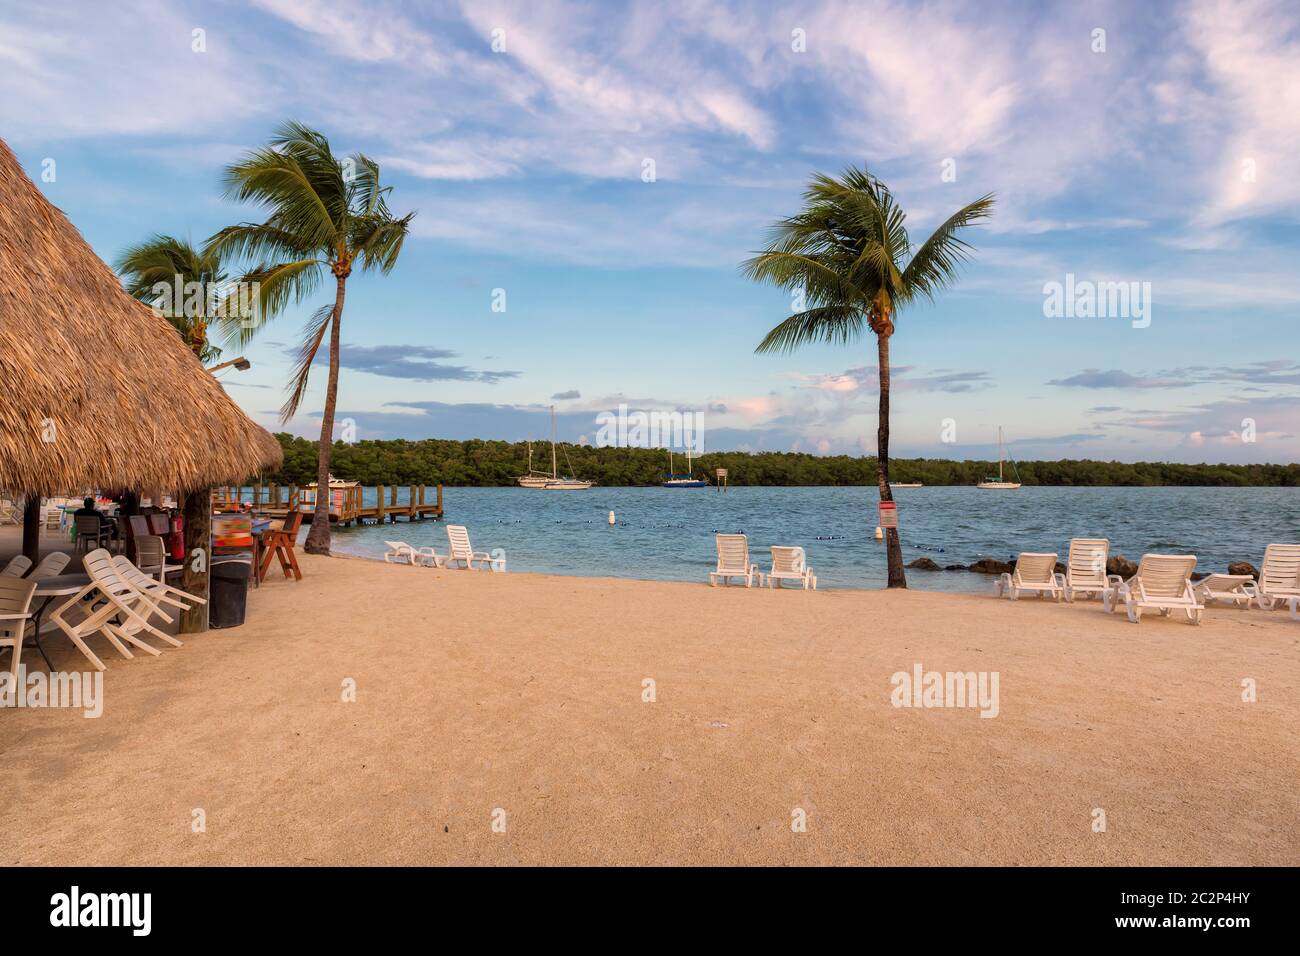 Tropical Beach resort and palm trees at sunset Stock Photo